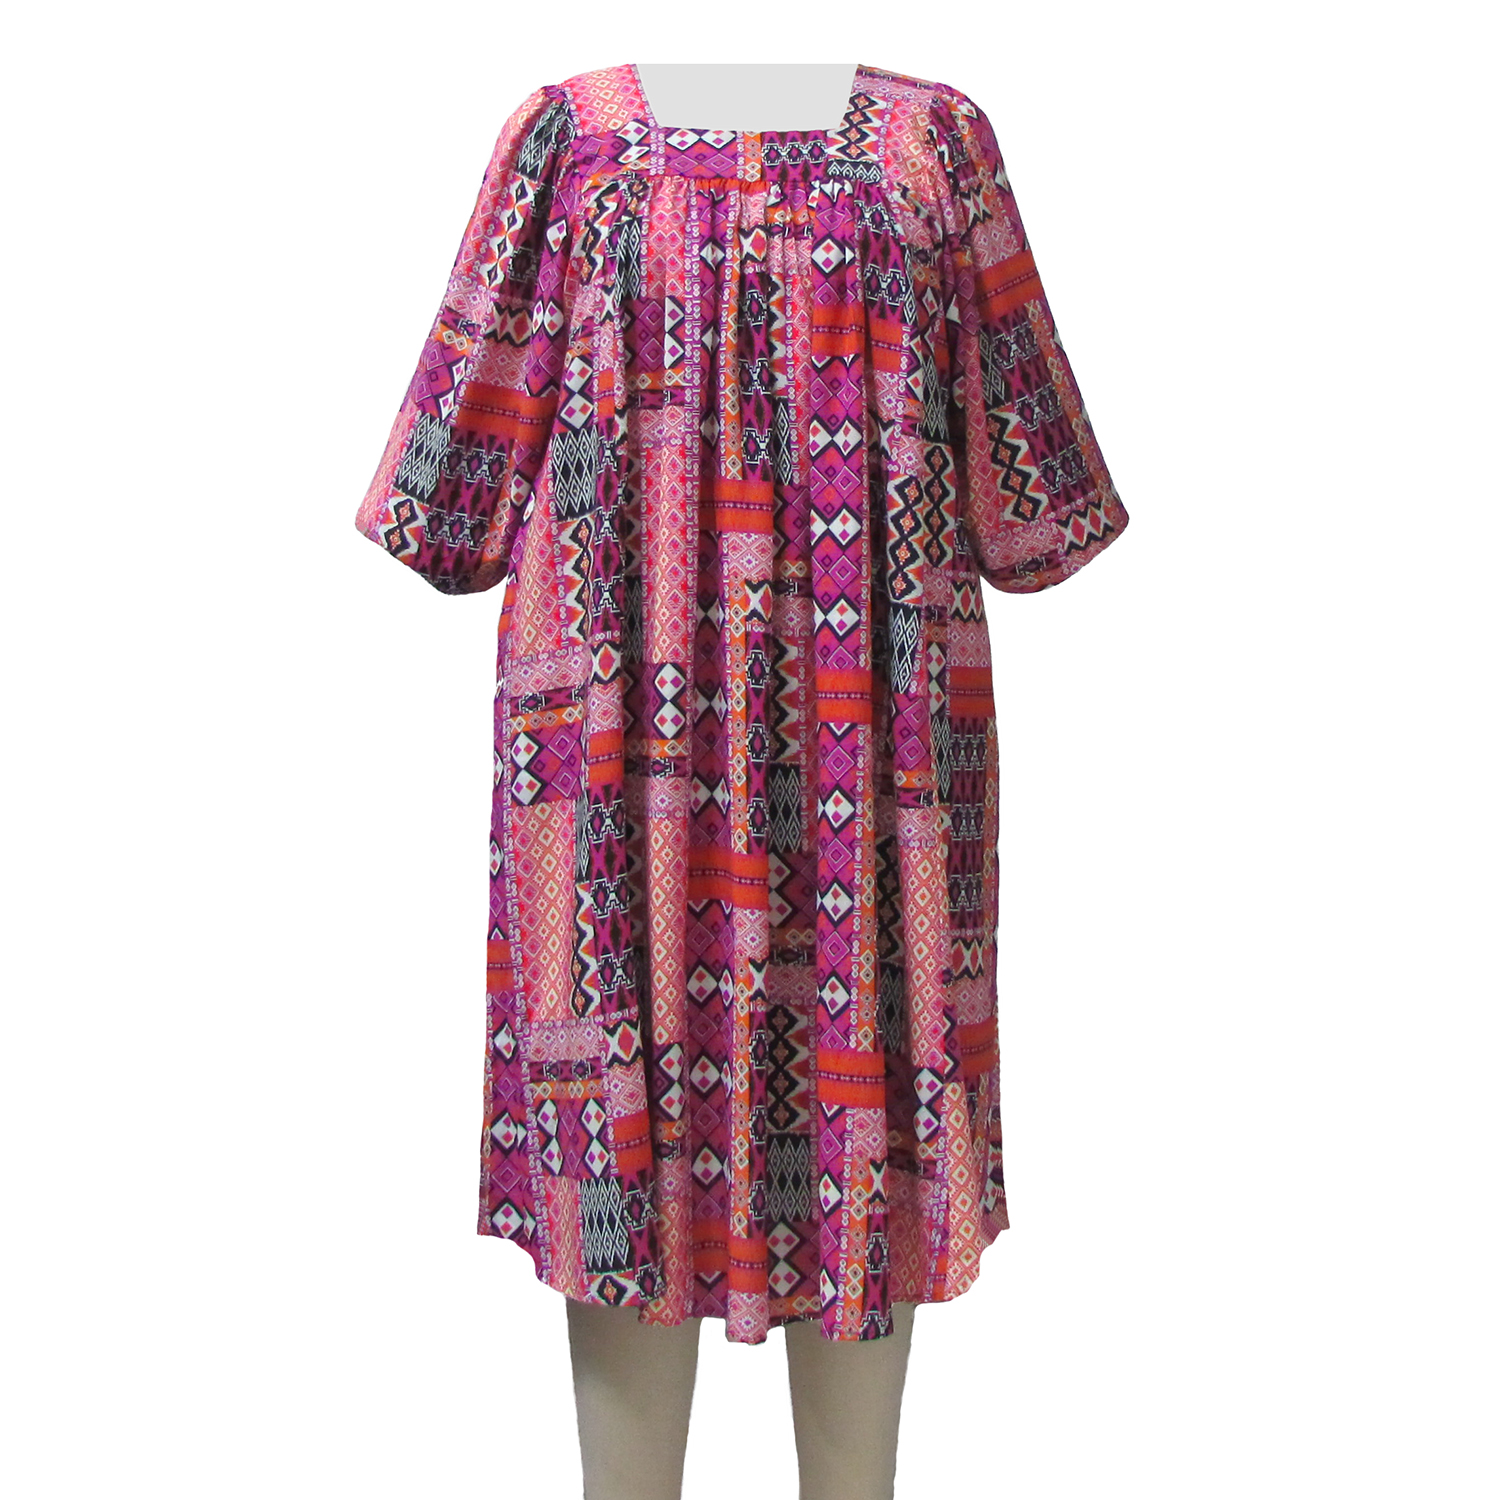 A Personal Touch Pink Tribal Float Dress Plus Size Women's Dress